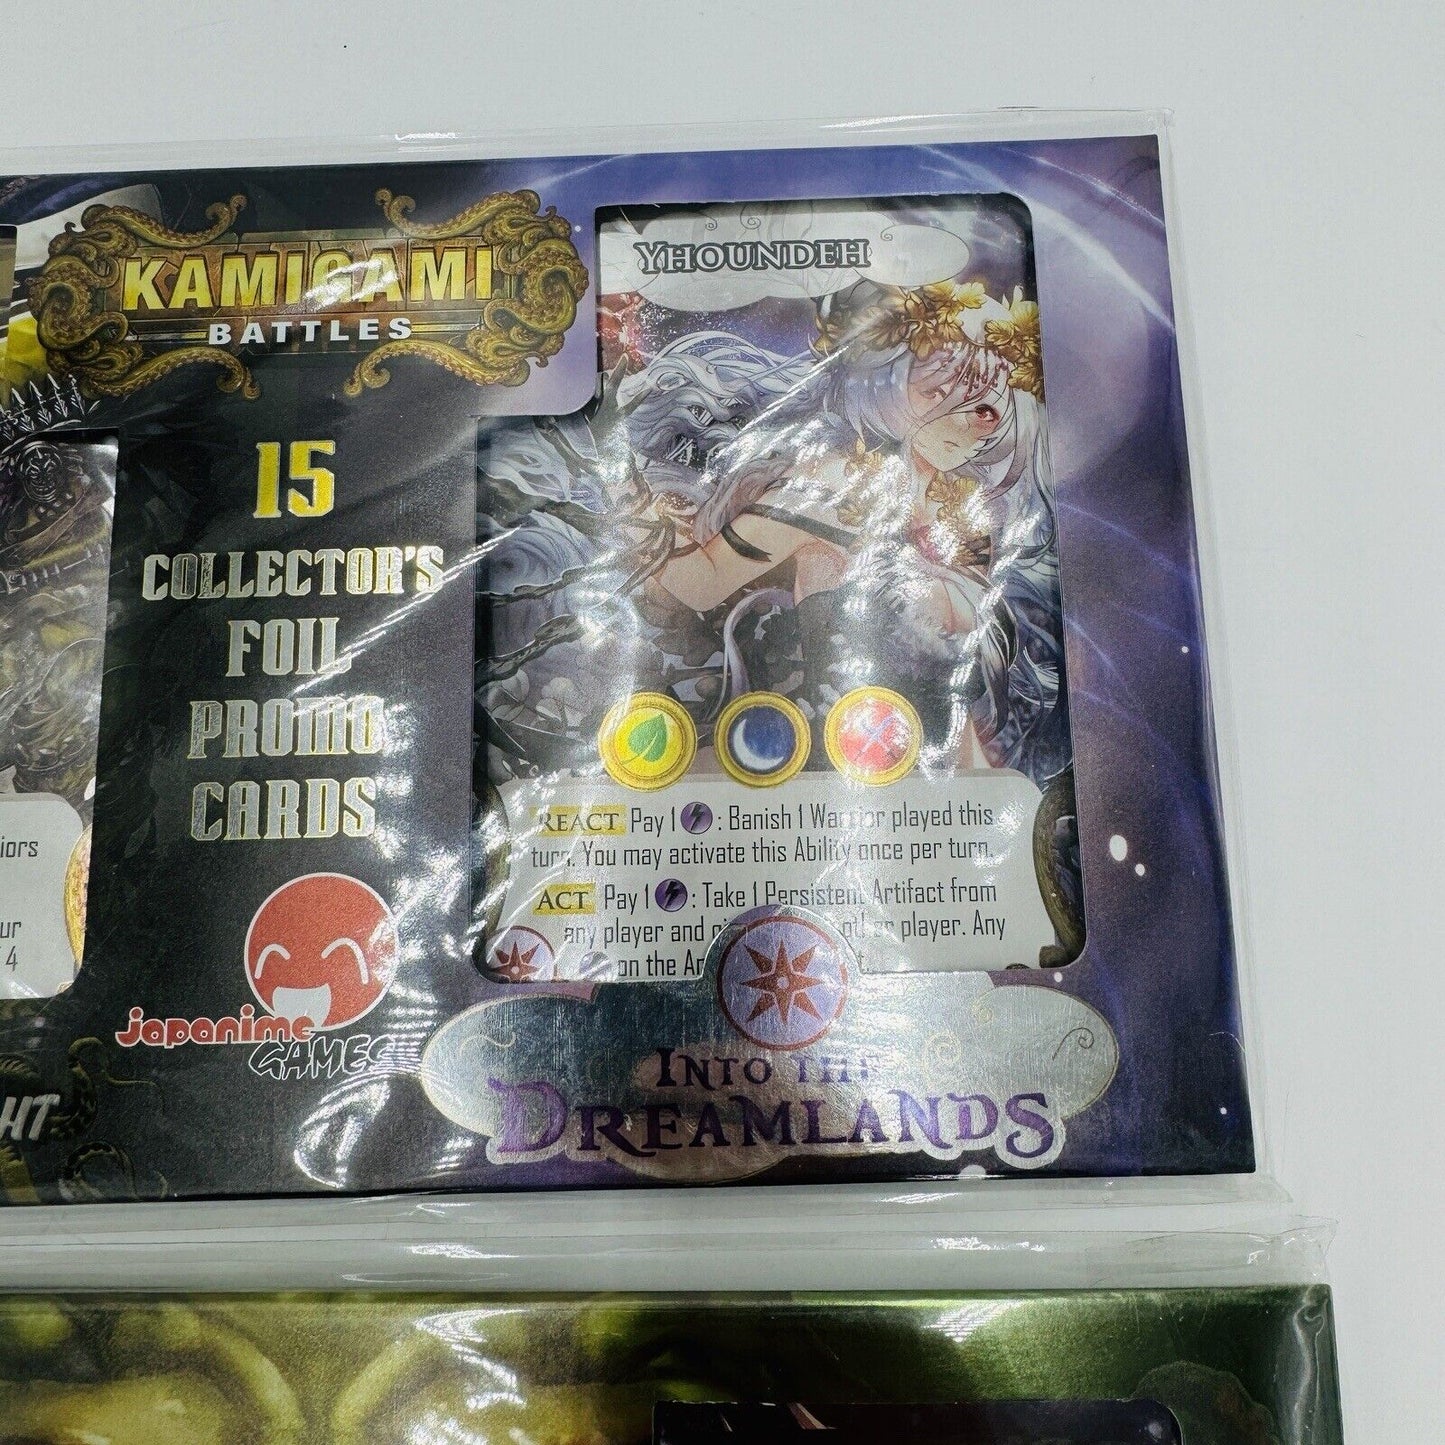 Kamigami Battles 15 Collectors Foil Promo Cards Rise Of Old Ones 2 Sets 30 Cards